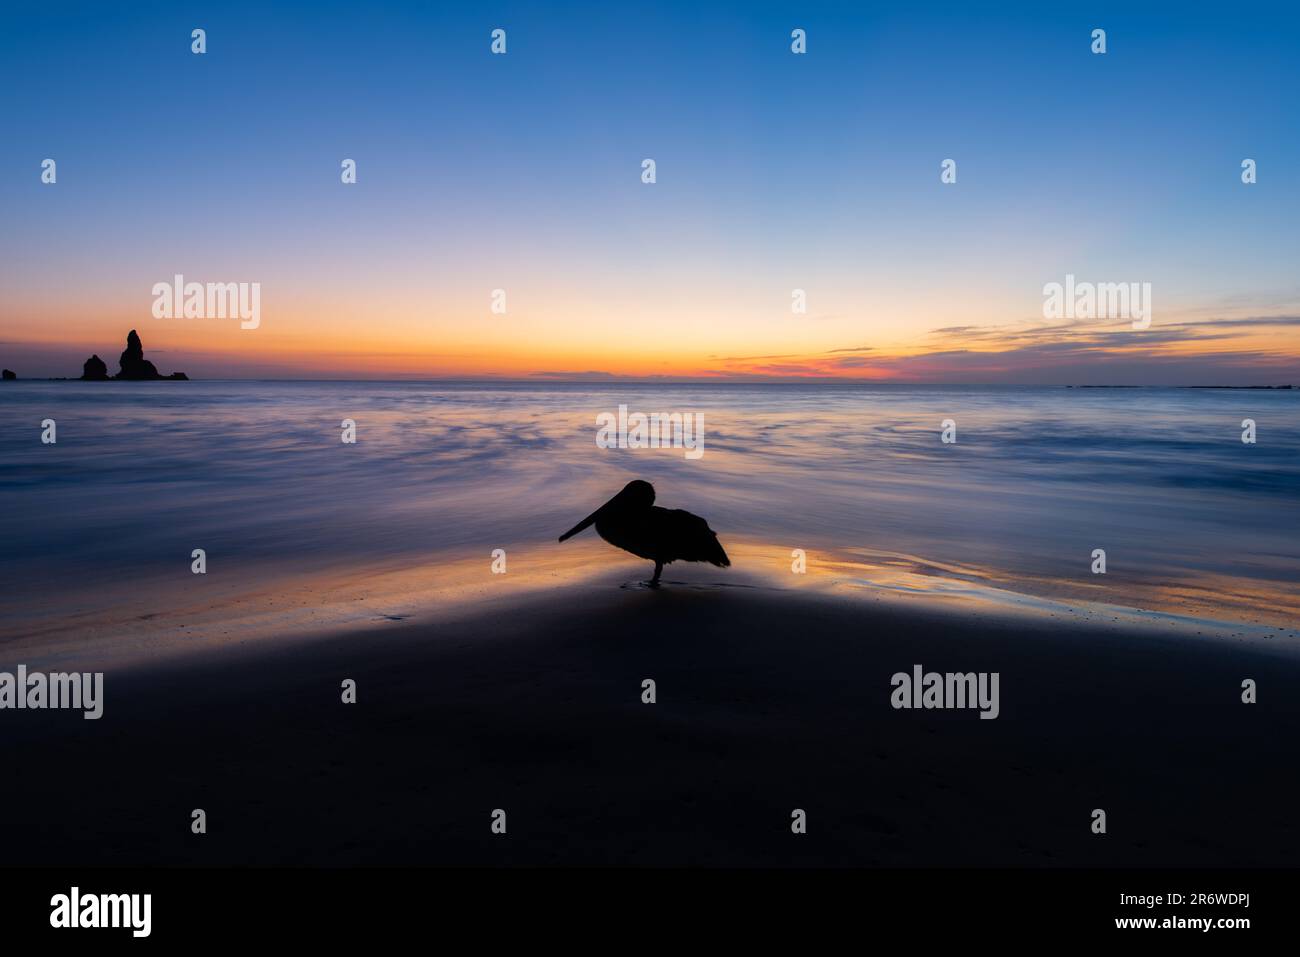 Long exposure of a silhouette of a pelican resting on the beach at sunset in Nicaragua on the pacific ocean Stock Photo